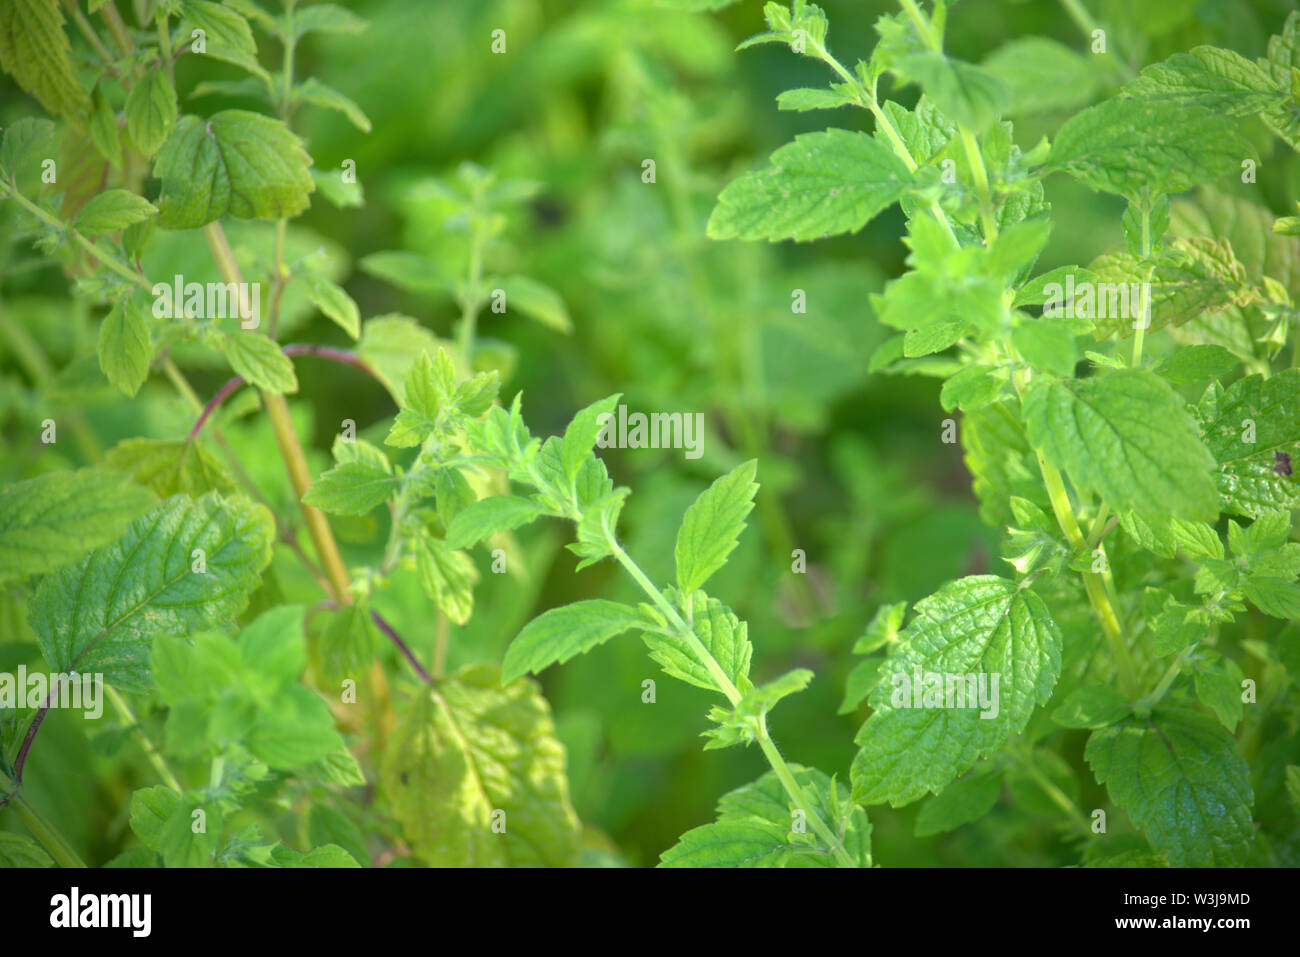 Stems and leaves of herb lemon balm Stock Photo